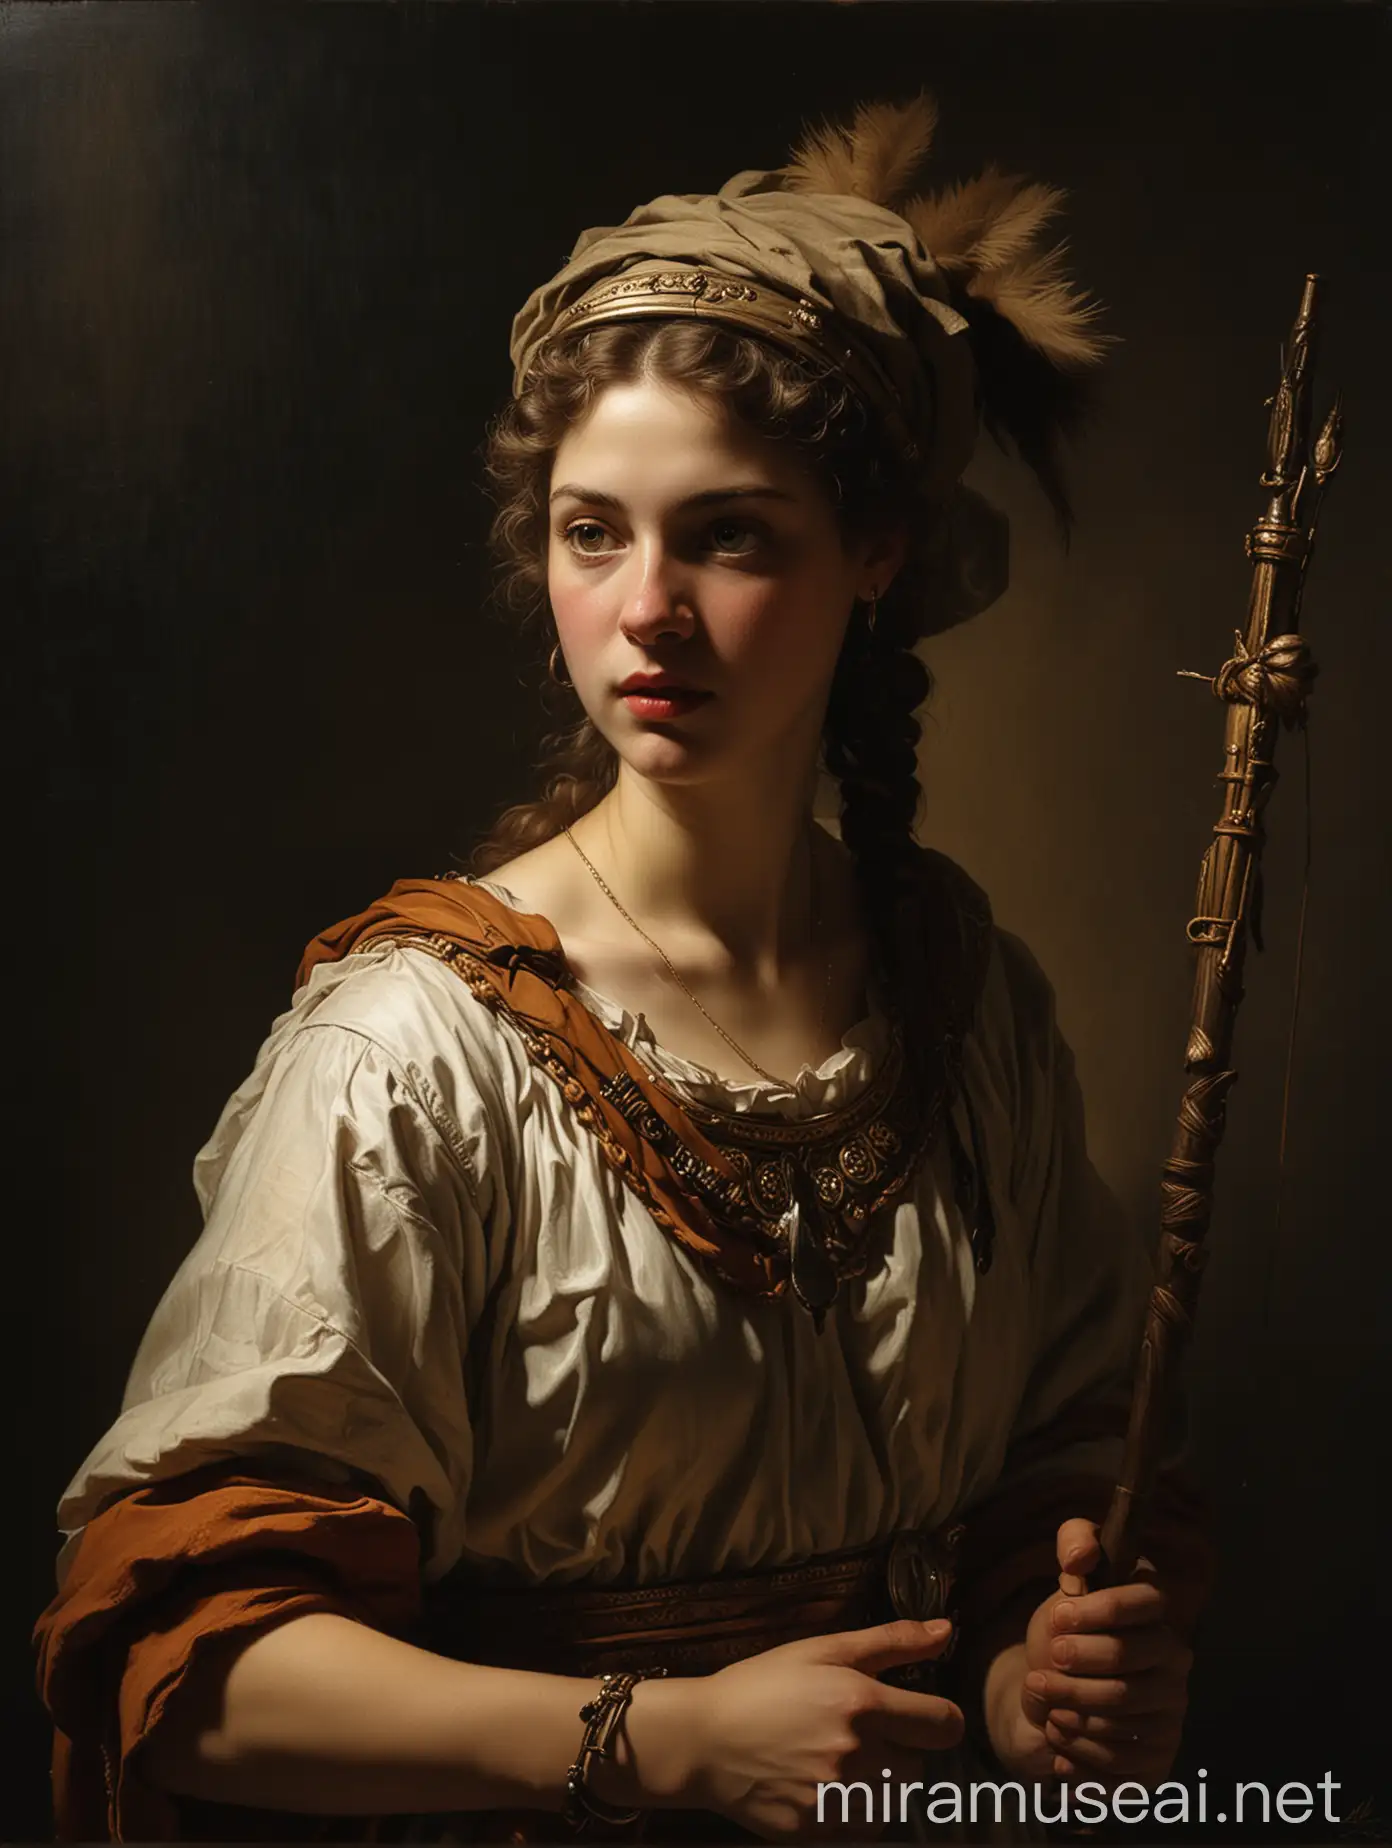 painting that will show artemis from greek mythology, in a Rembrandt style, Dramatic use of light and shadow, a technique known as chiaroscuro, This creates a striking contrast between light and dark areas, often highlighting the focal point of the painting, His compositions often convey deep emotional or narrative intensity, Rembrandt's color palette is typically rich but subdued, featuring earthy tones and warm colors, His brushwork is renowned for its expressiveness and texture, ranging from smooth and finely detailed in areas of focus to more loose and impressionistic in other parts,